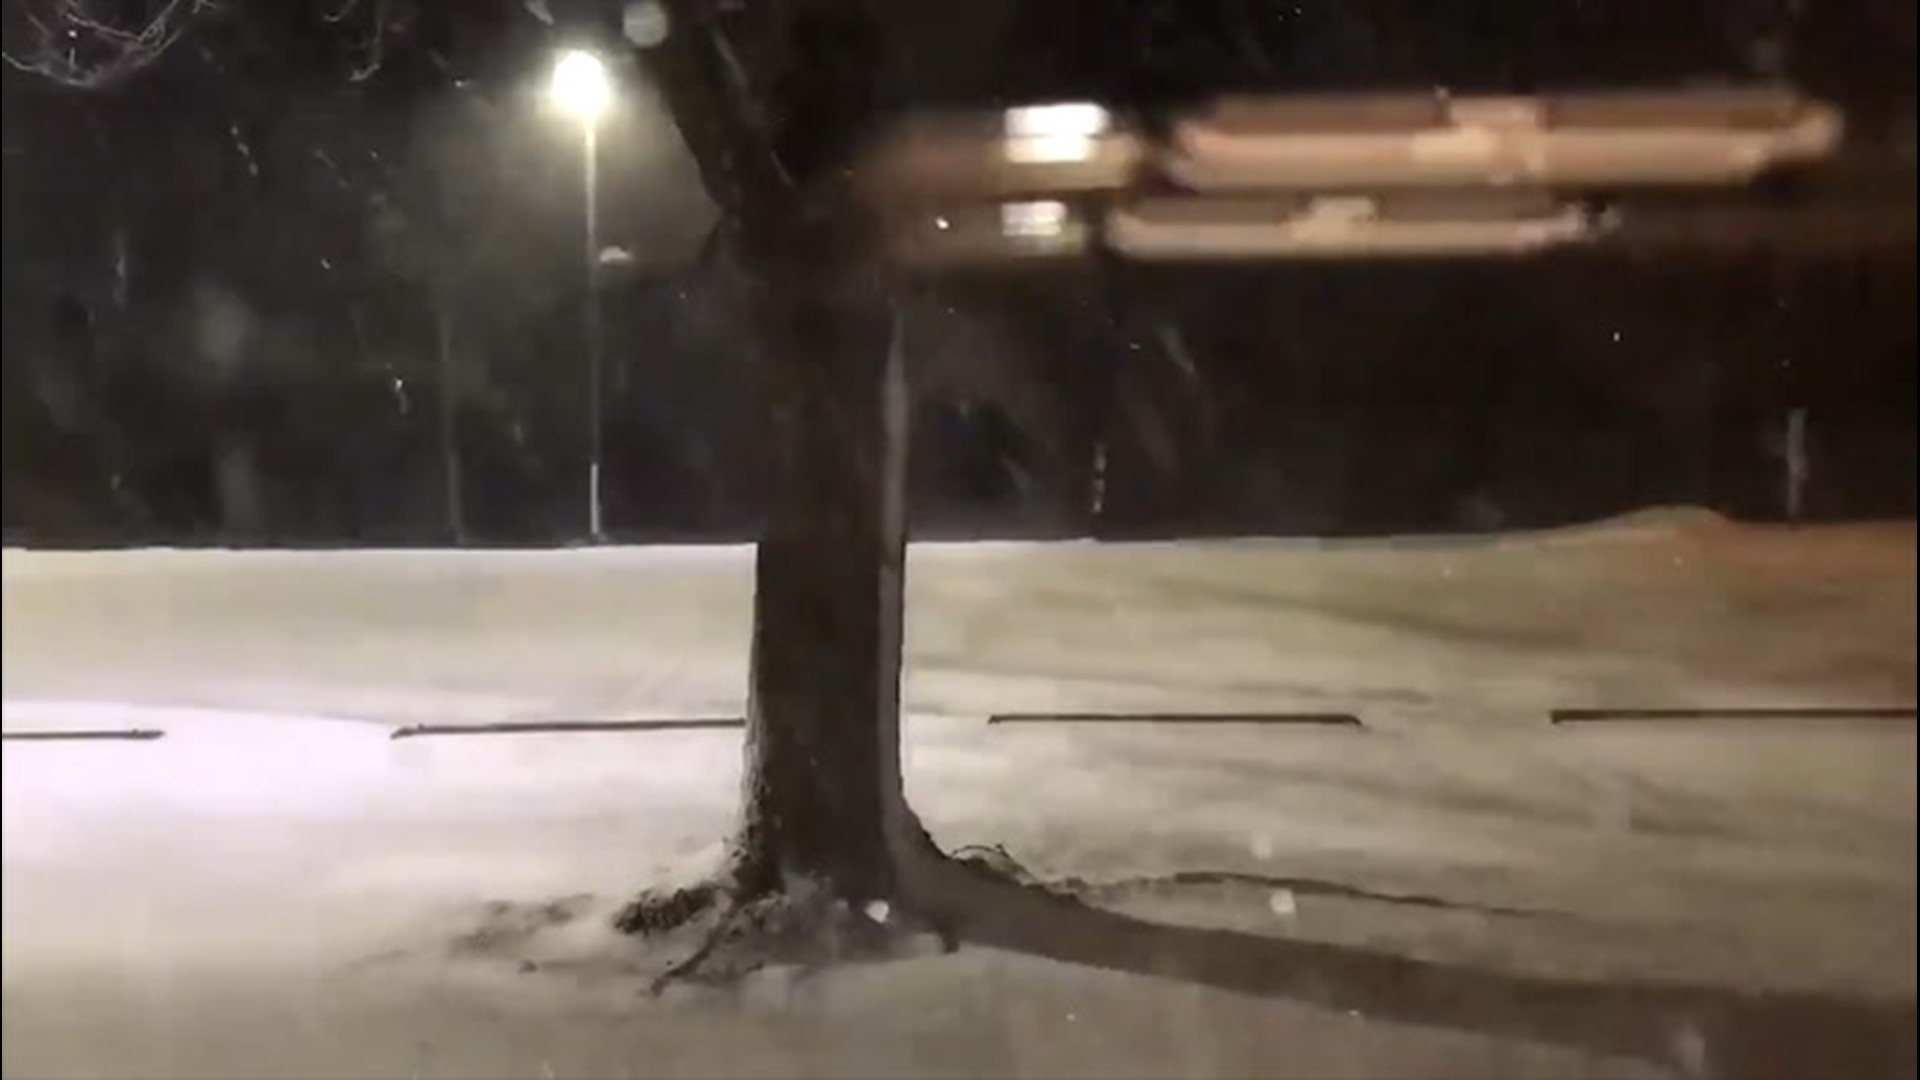 A storm brought several inches of snow to Iowa from Jan. 14-15, as you can see in this time-lapse footage from the National Weather Service.